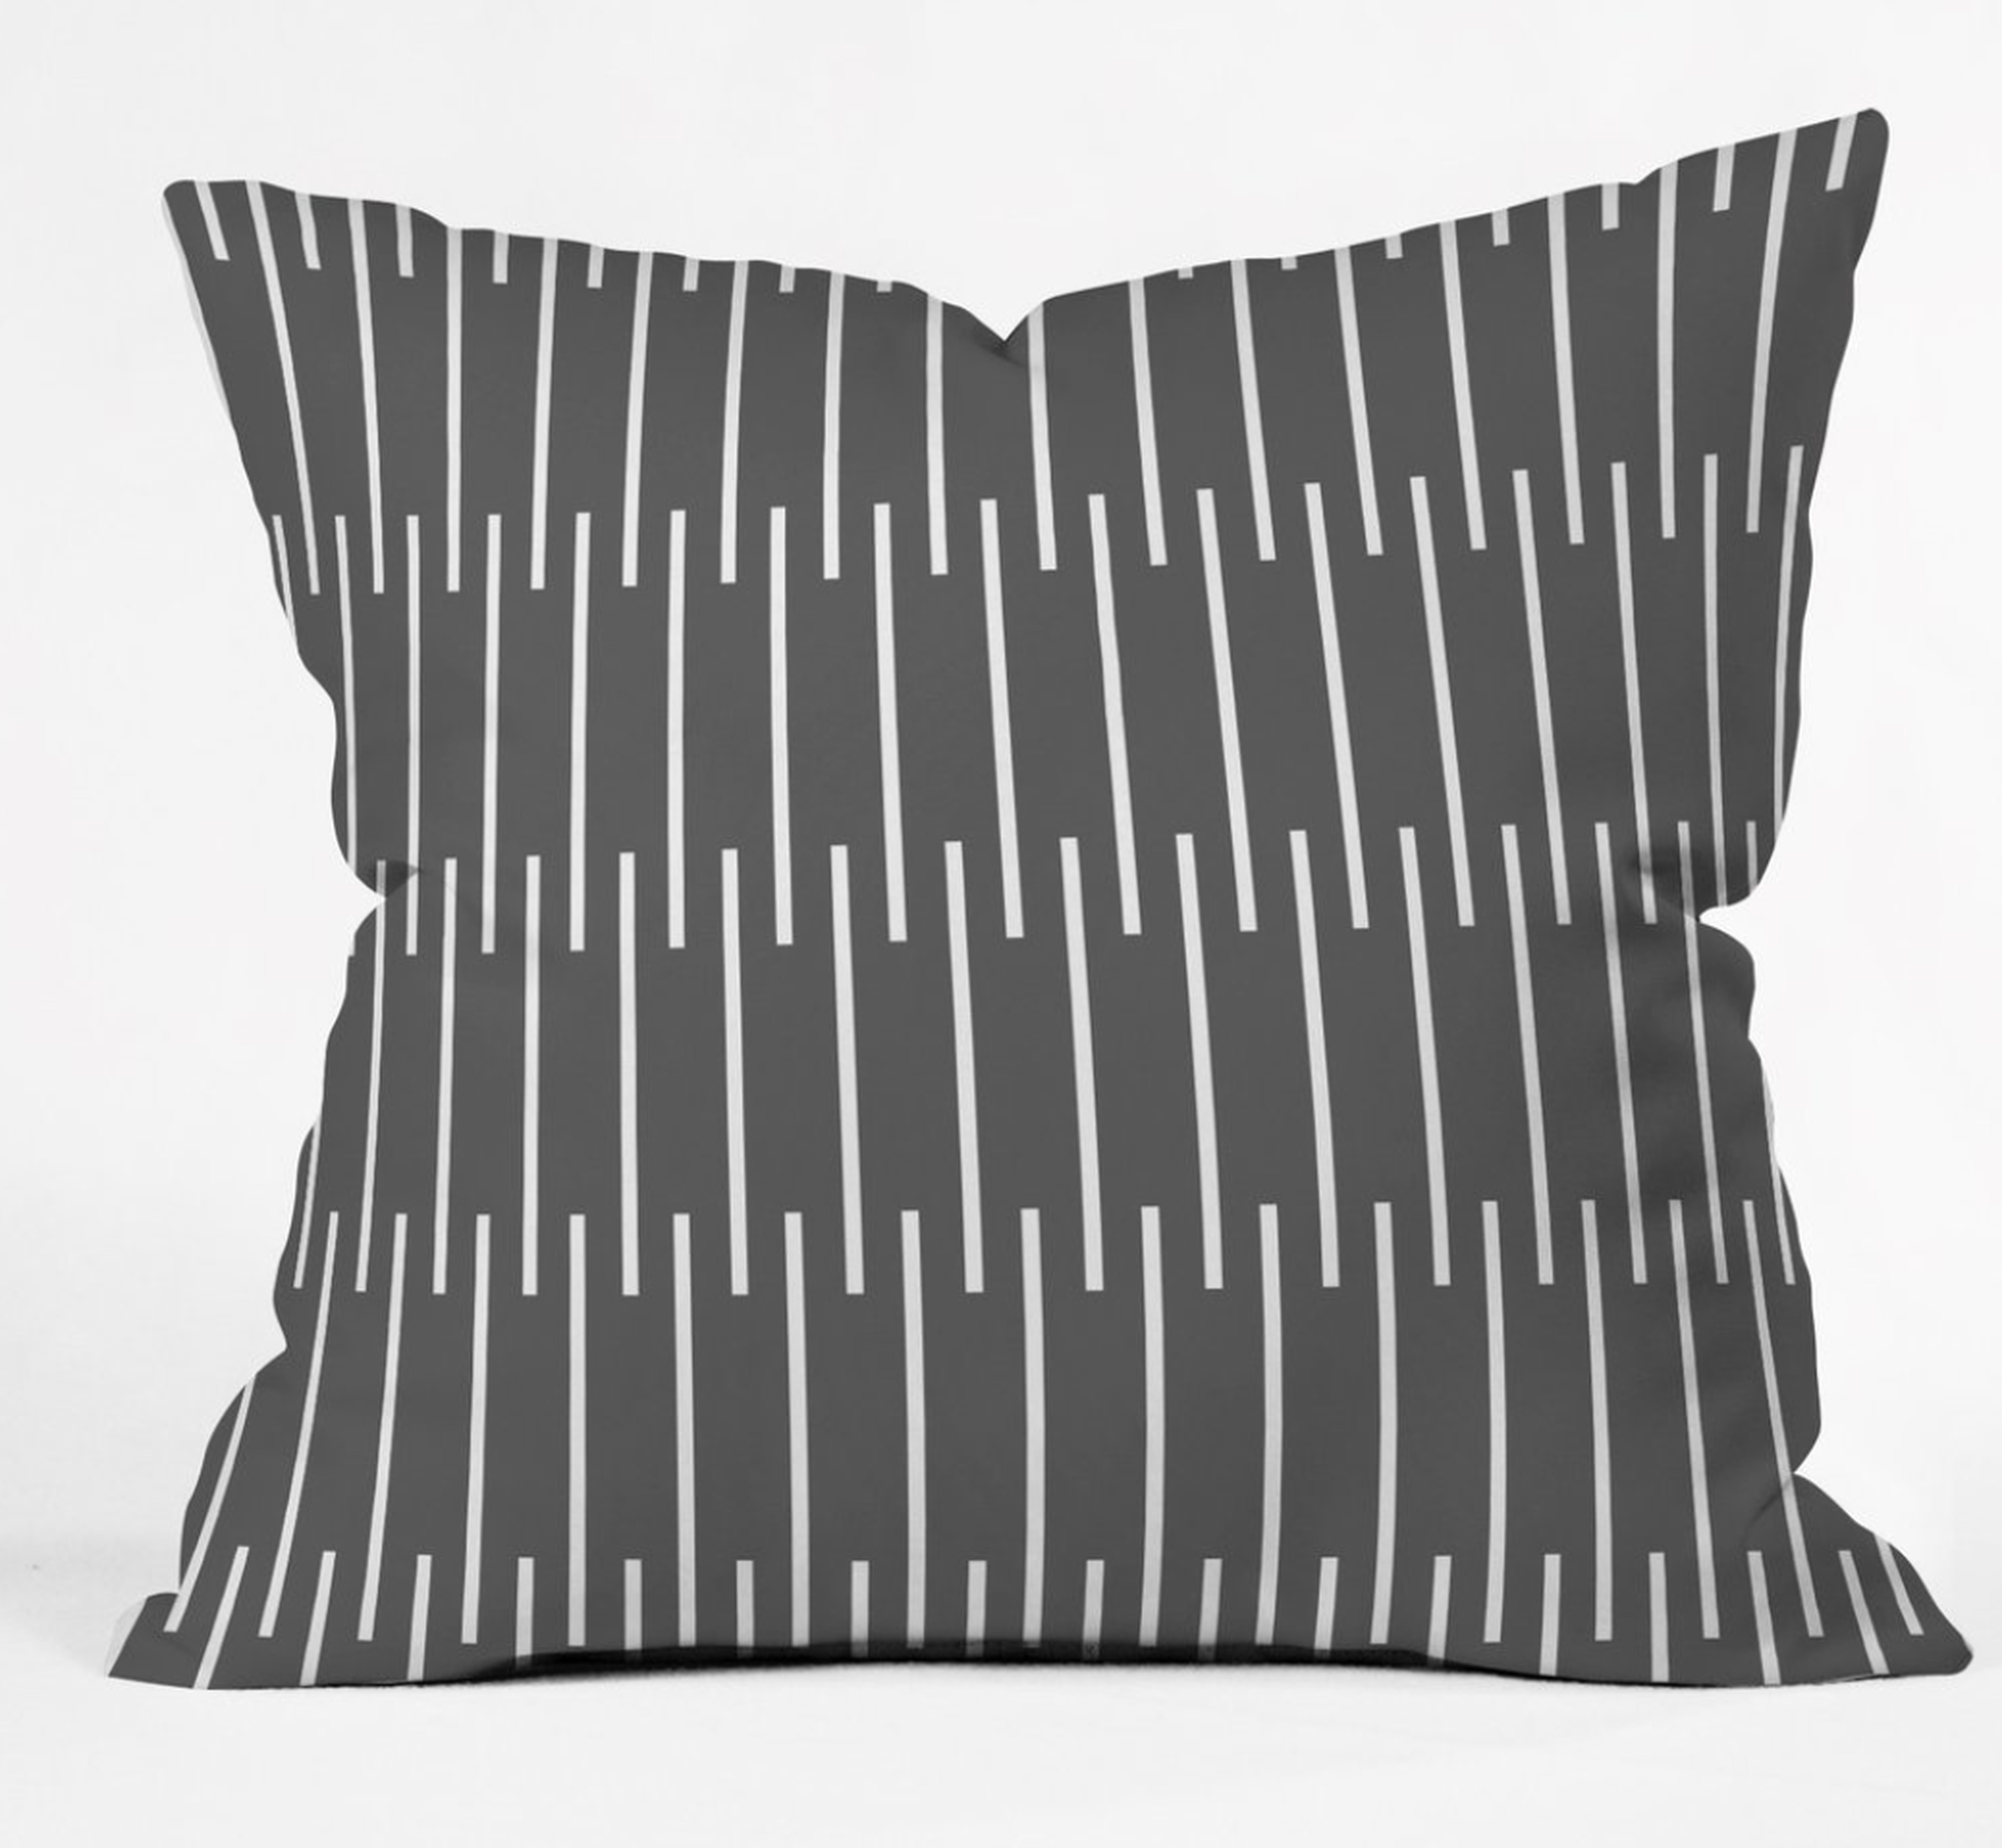 meridian  grey  Throw Pillow - insert included 16"x16" - Wander Print Co.